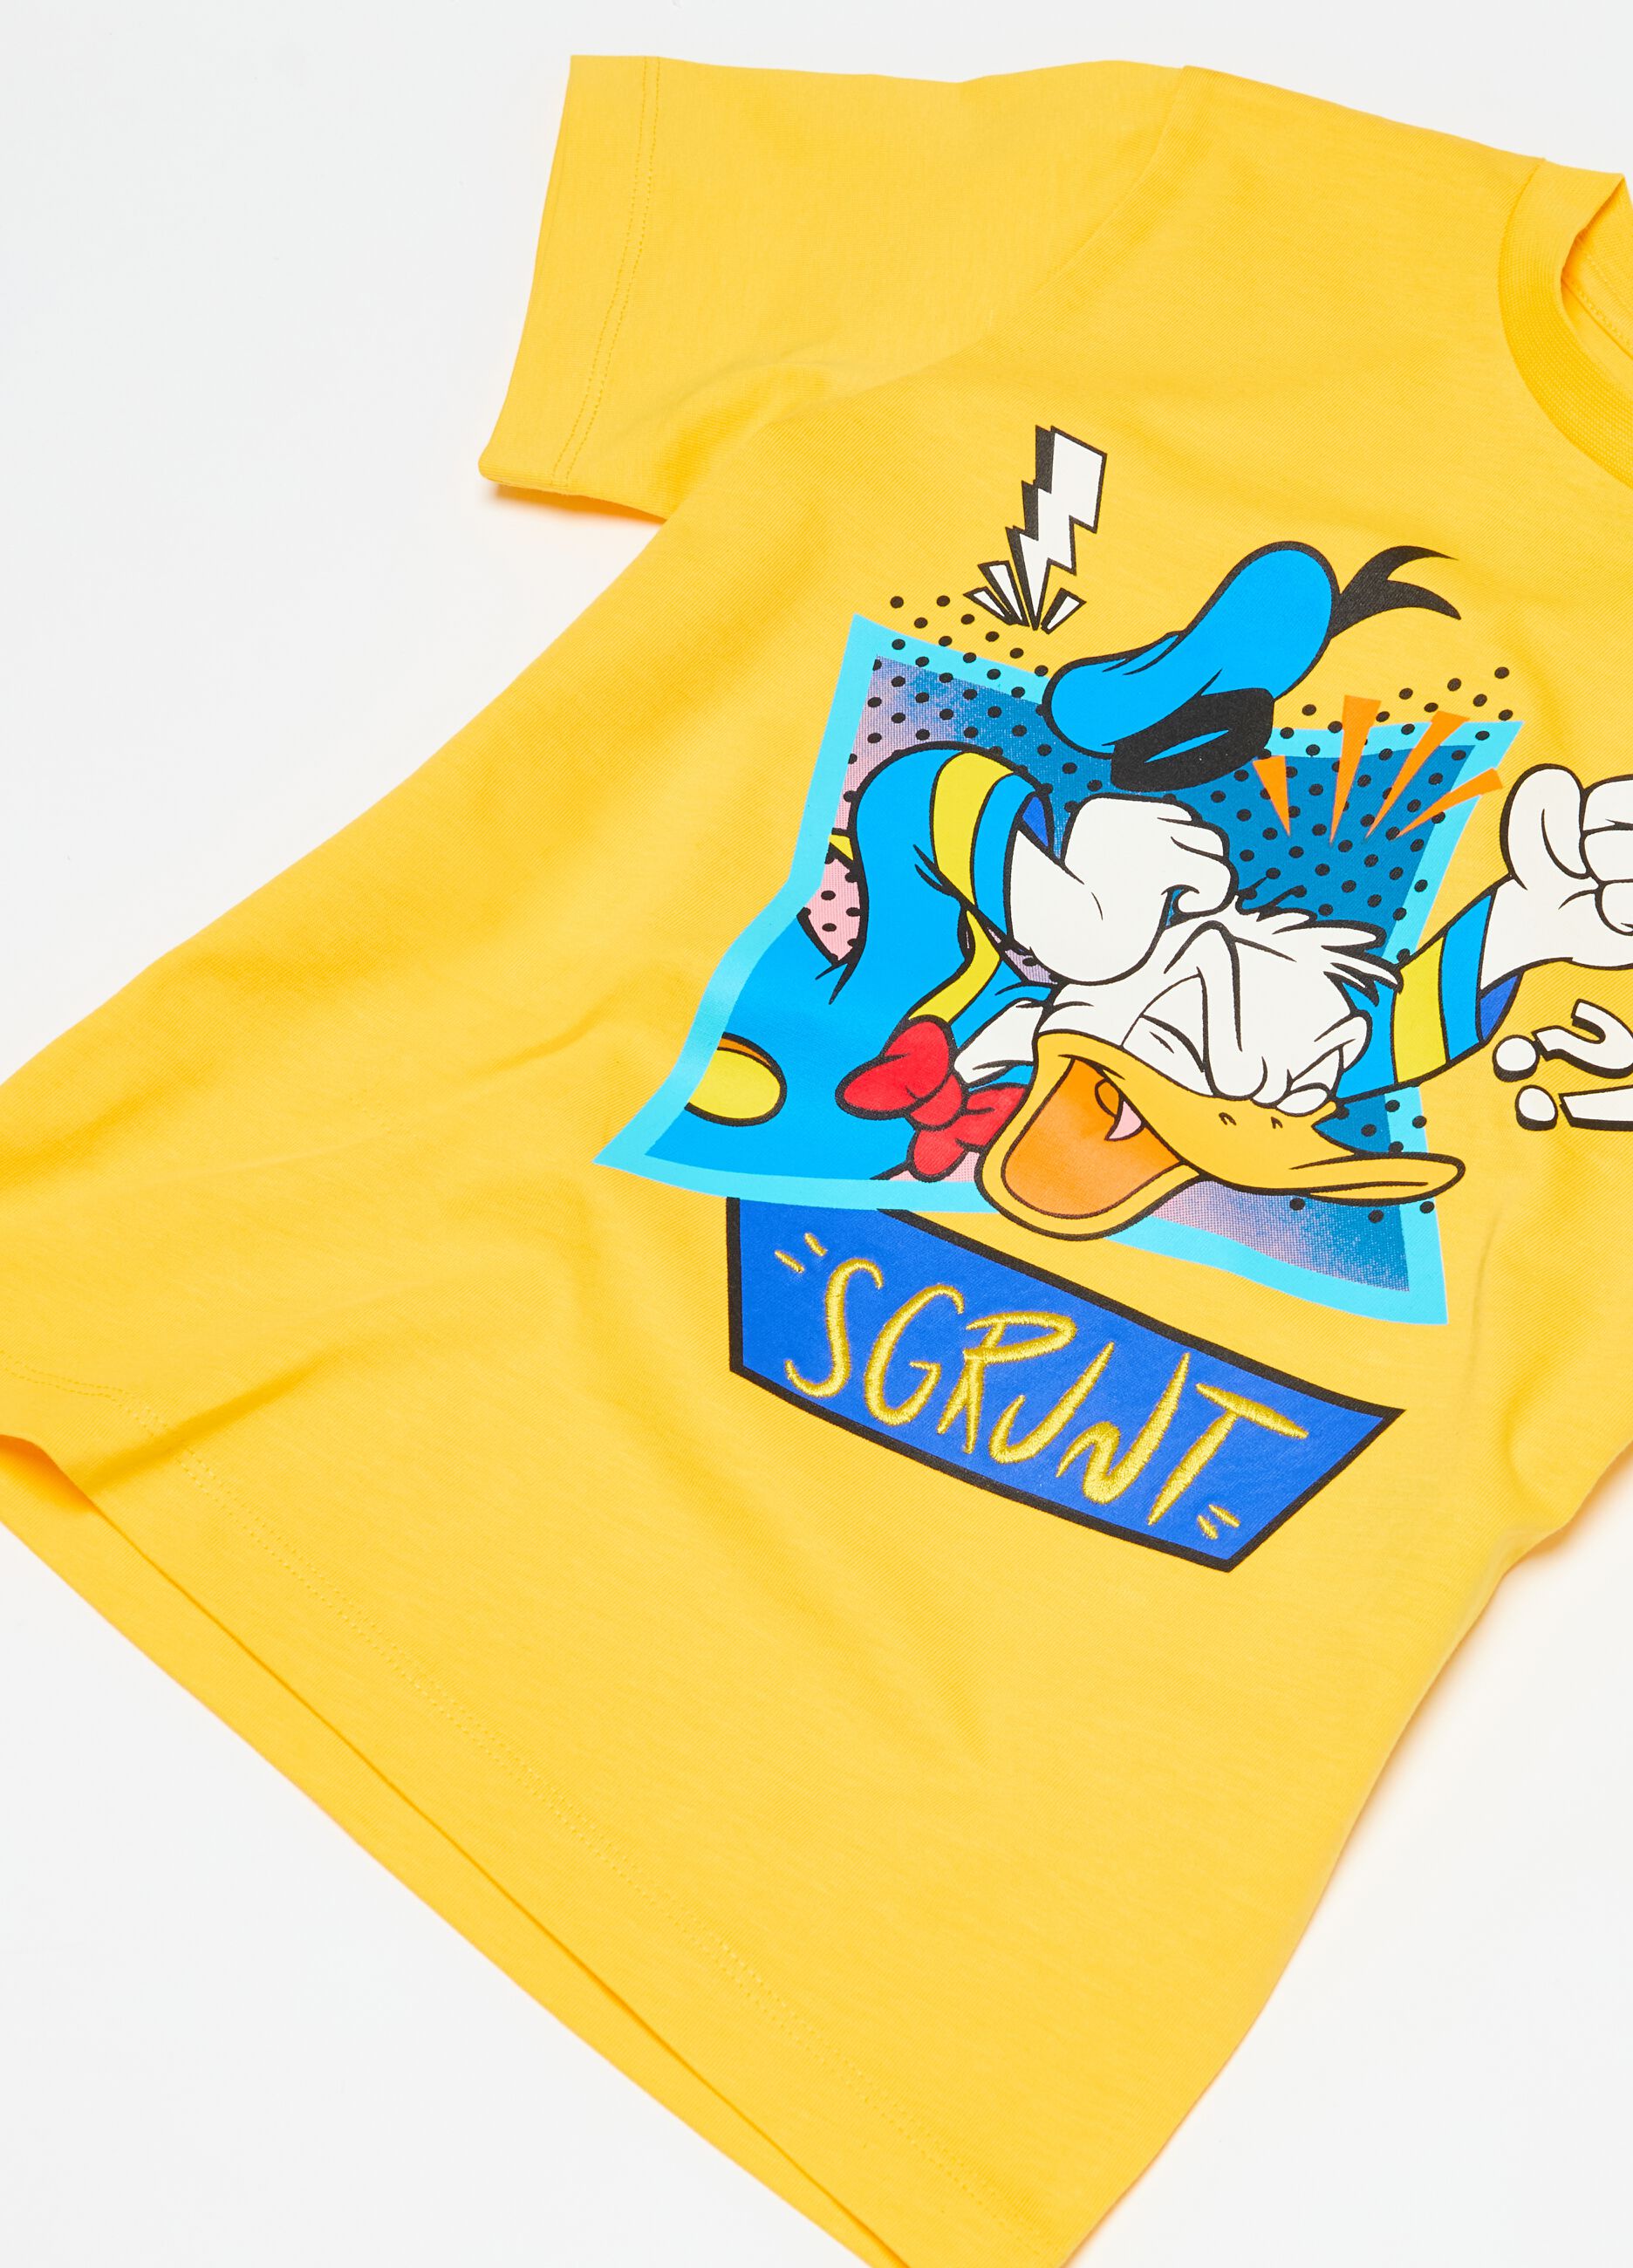 Cotton T-shirt with Donald Duck 90 print